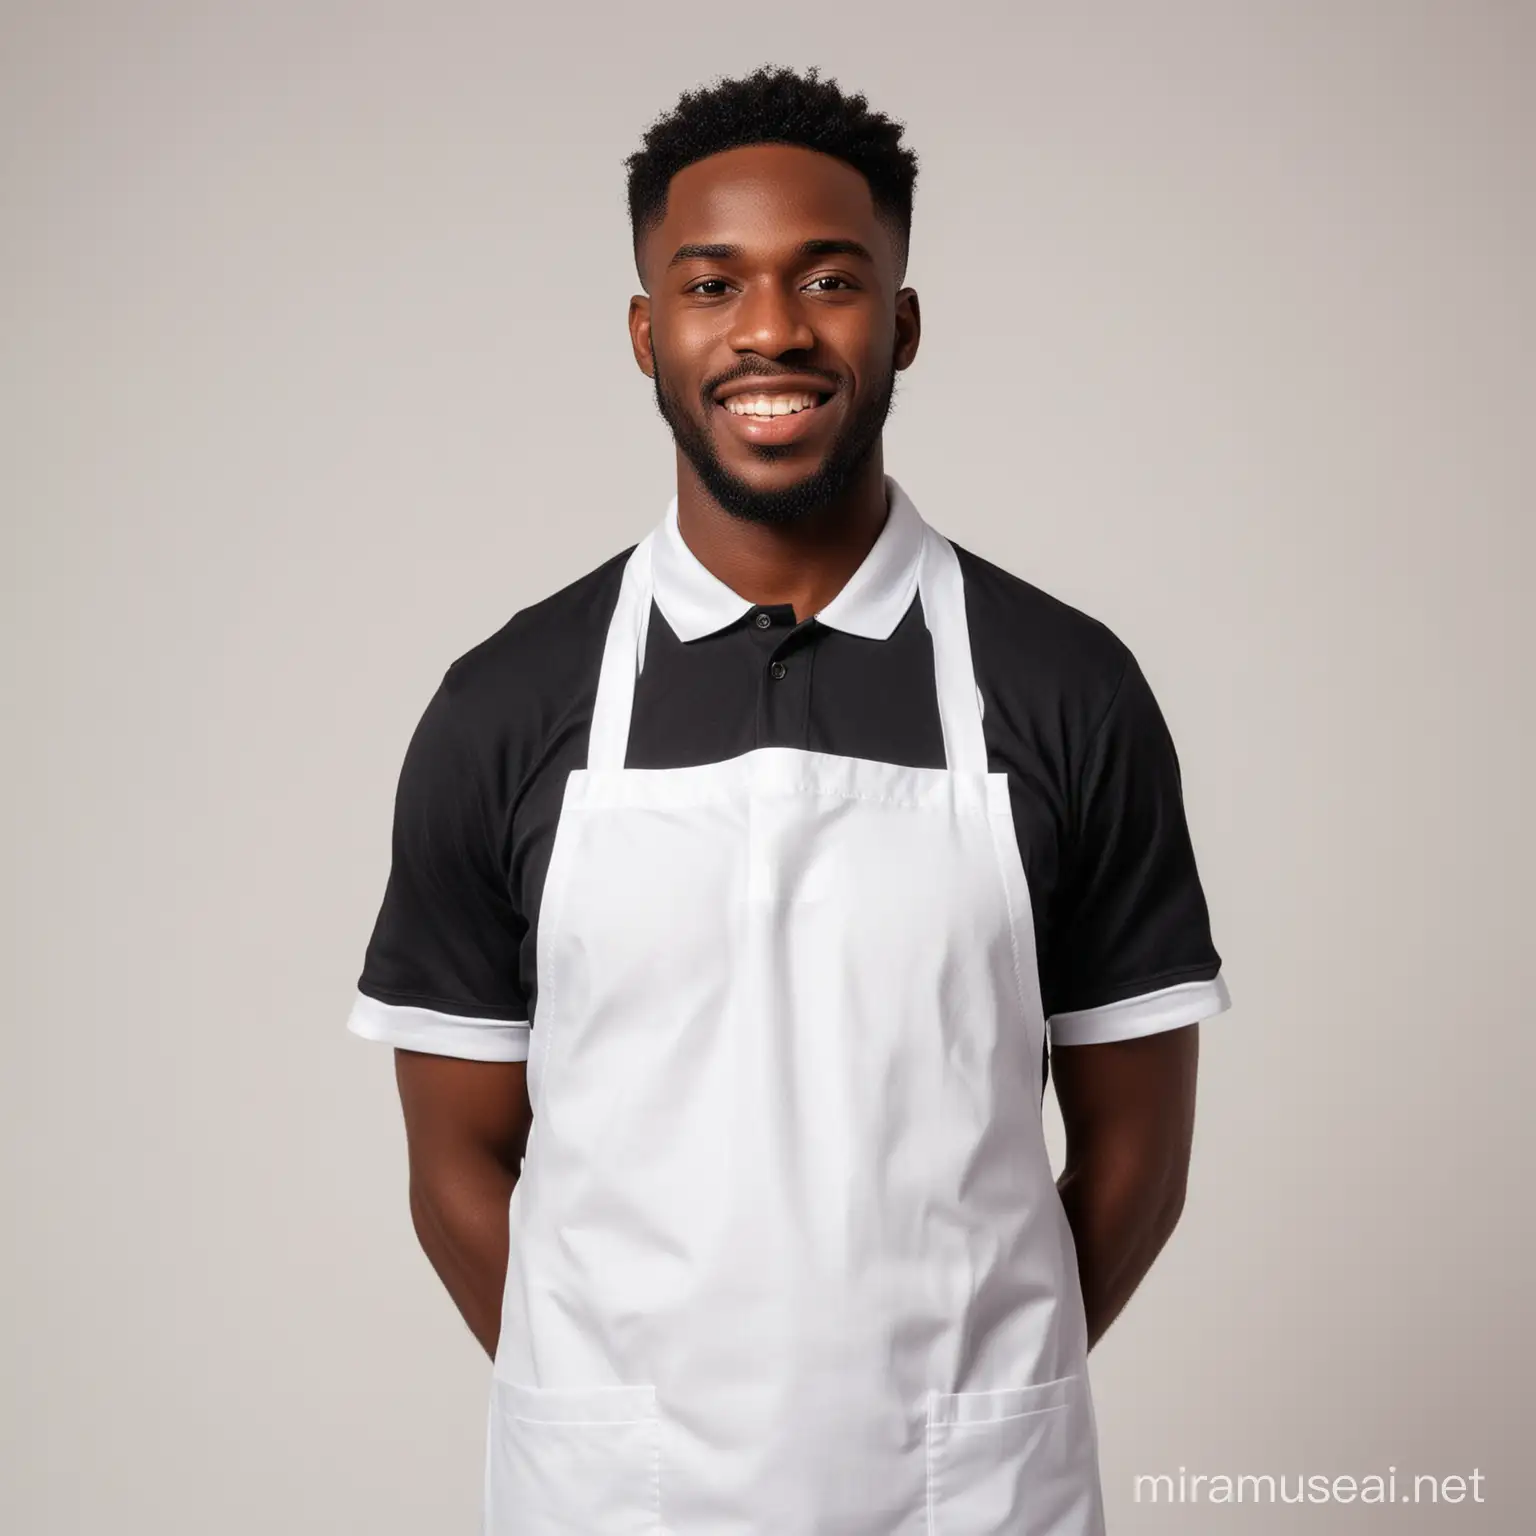 Professional Black Man in White Apron and Polo Shirt on White Background